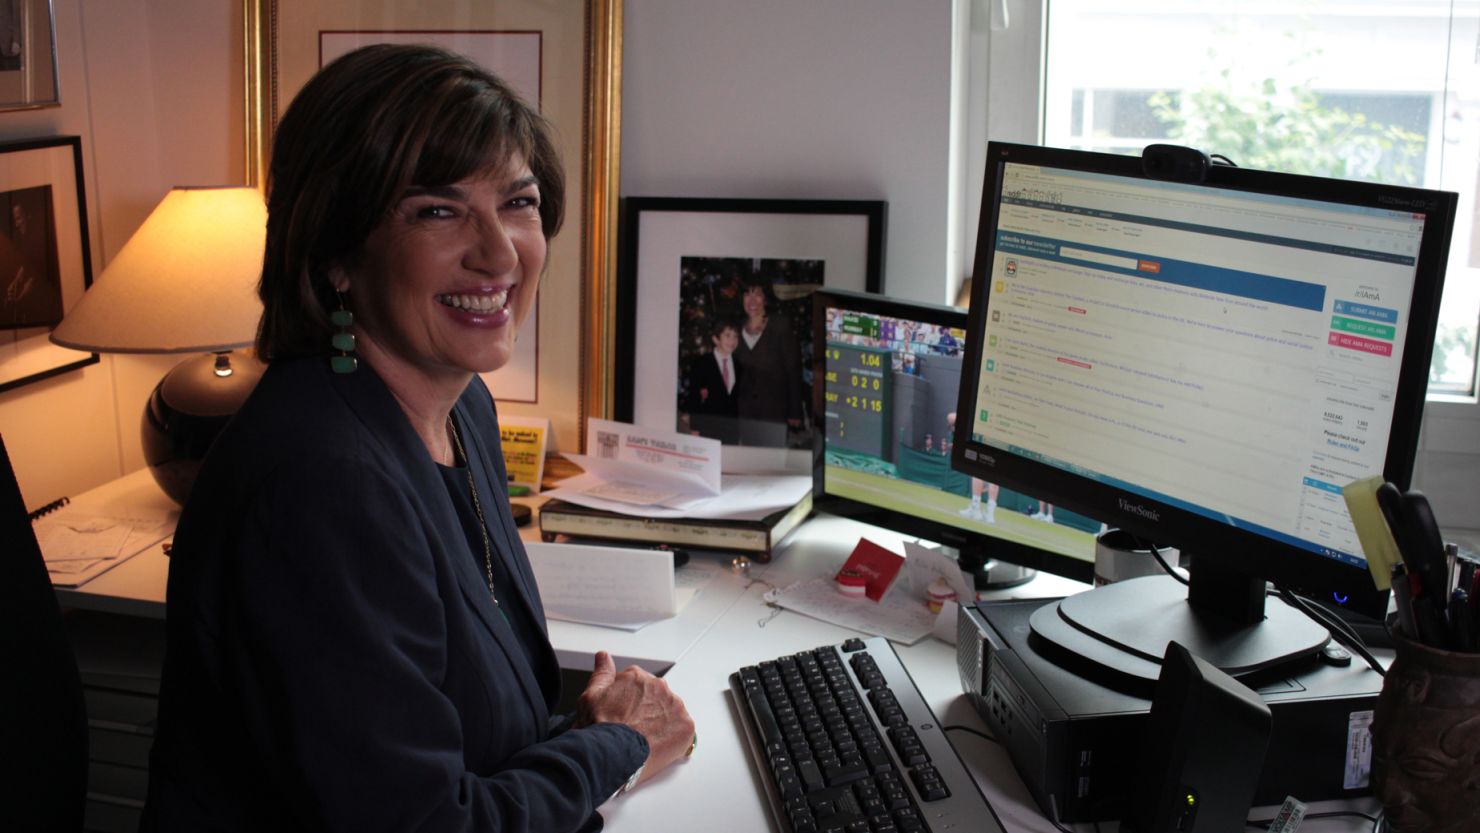 "I think the most important work I've done was covering Bosnia in the '90s," Christiane Amanpour says.